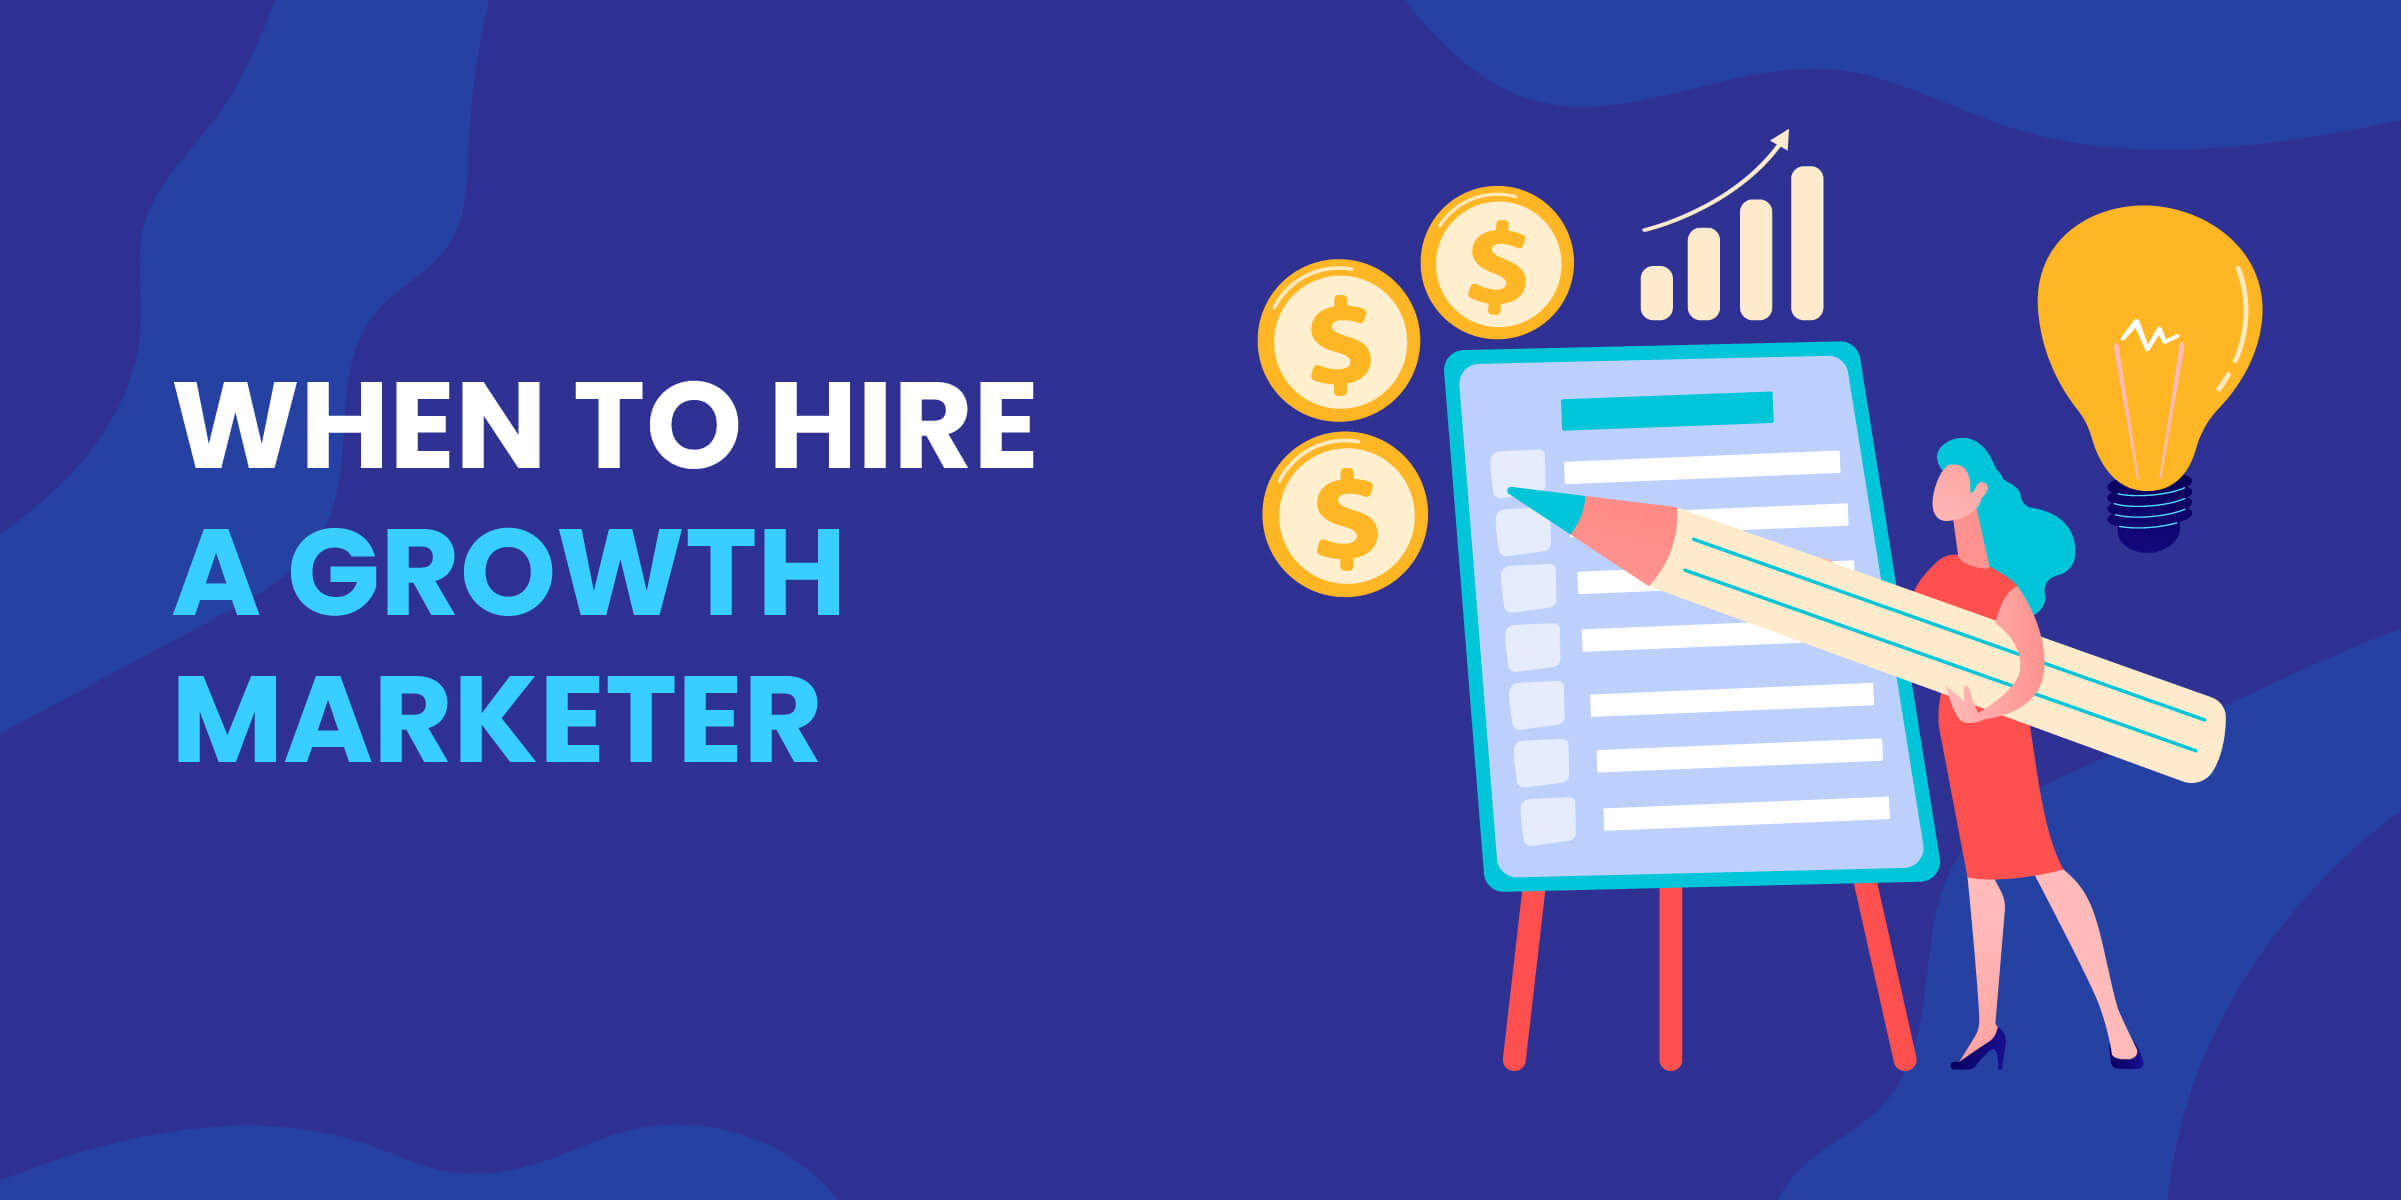 When to Hire Growth Marketer